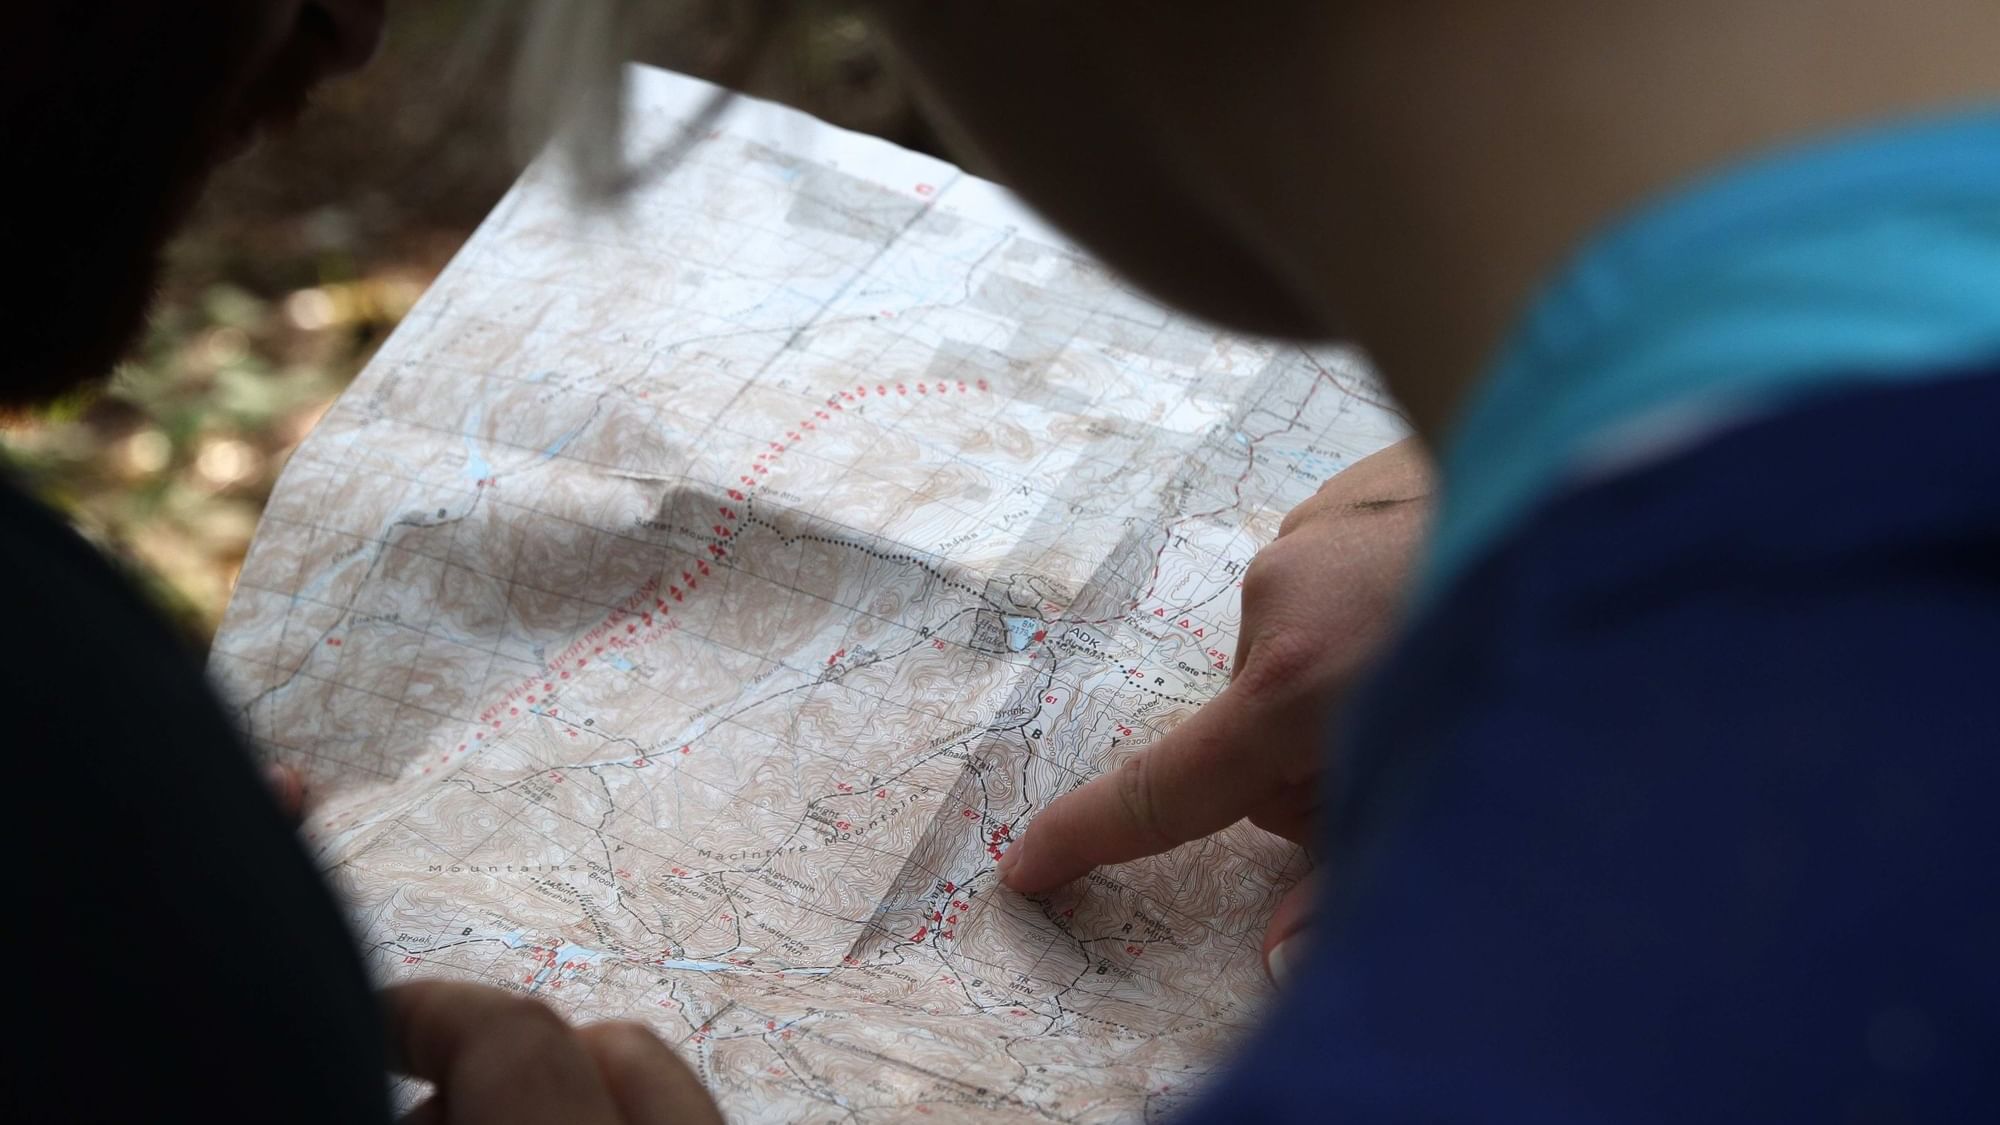 A man Searching location using the map at Originals Hotels